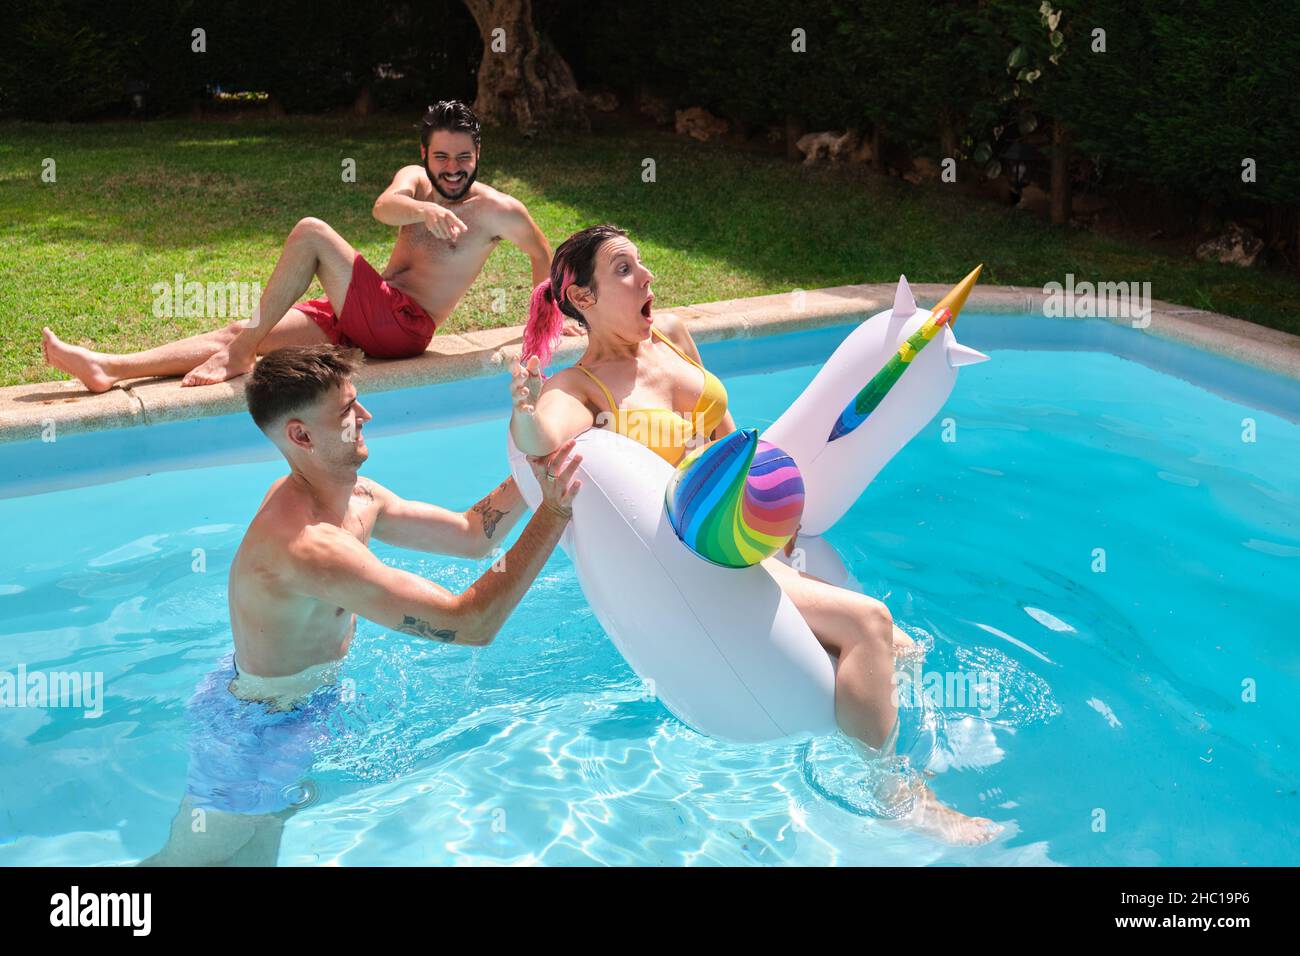 Young man throwing woman from a rainbow unicorn float into the swimming pool. Stock Photo